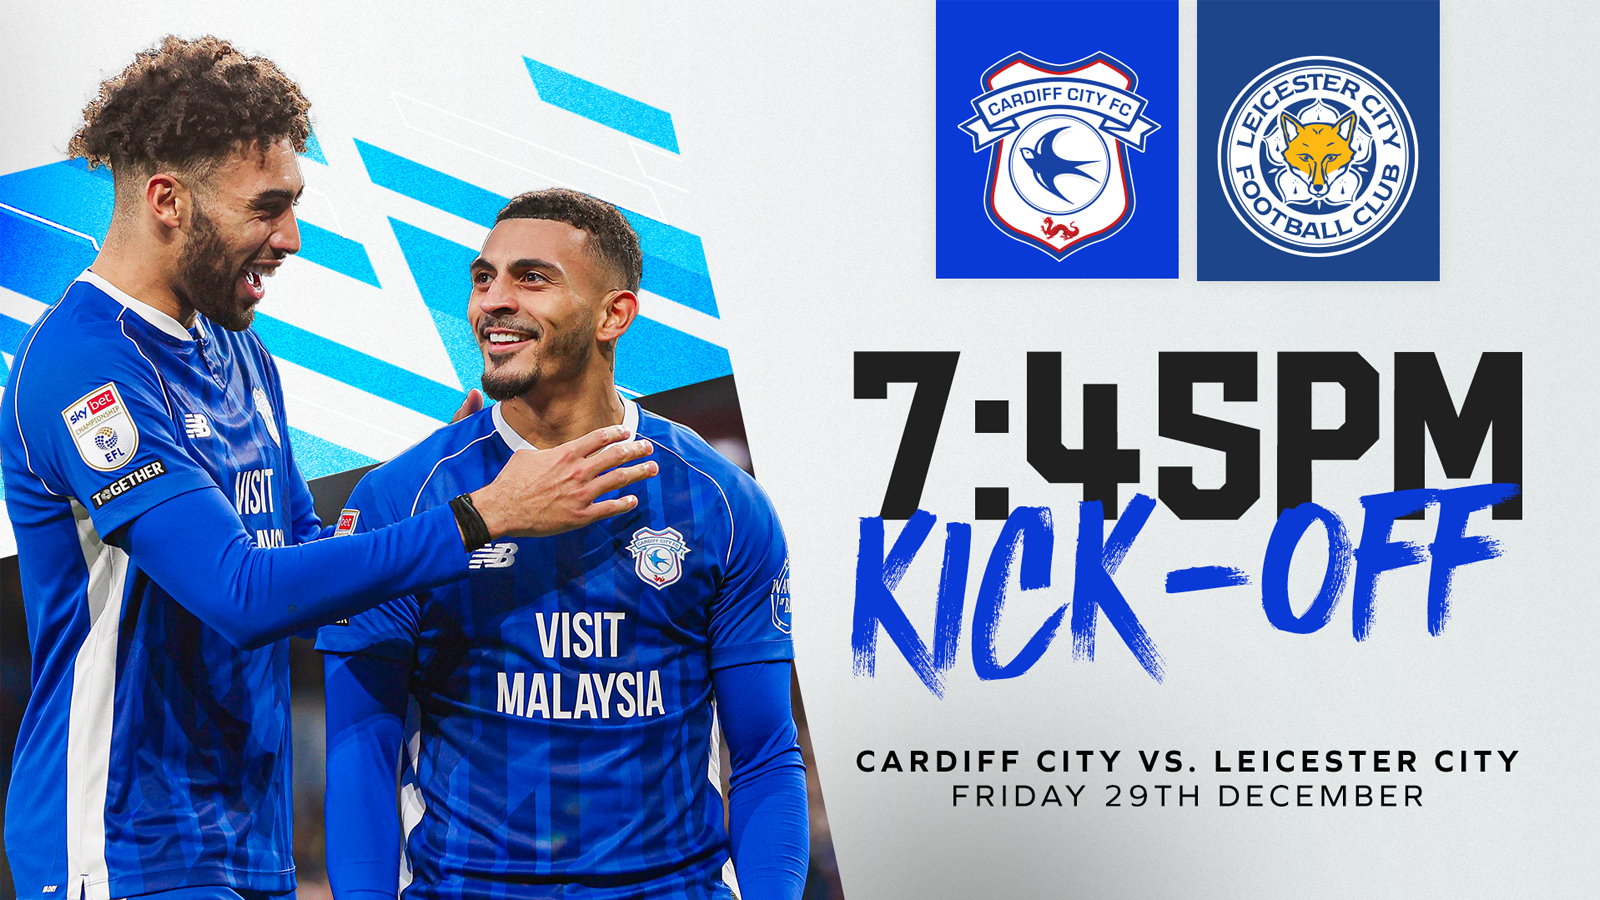 Cardiff City vs. Leicester City